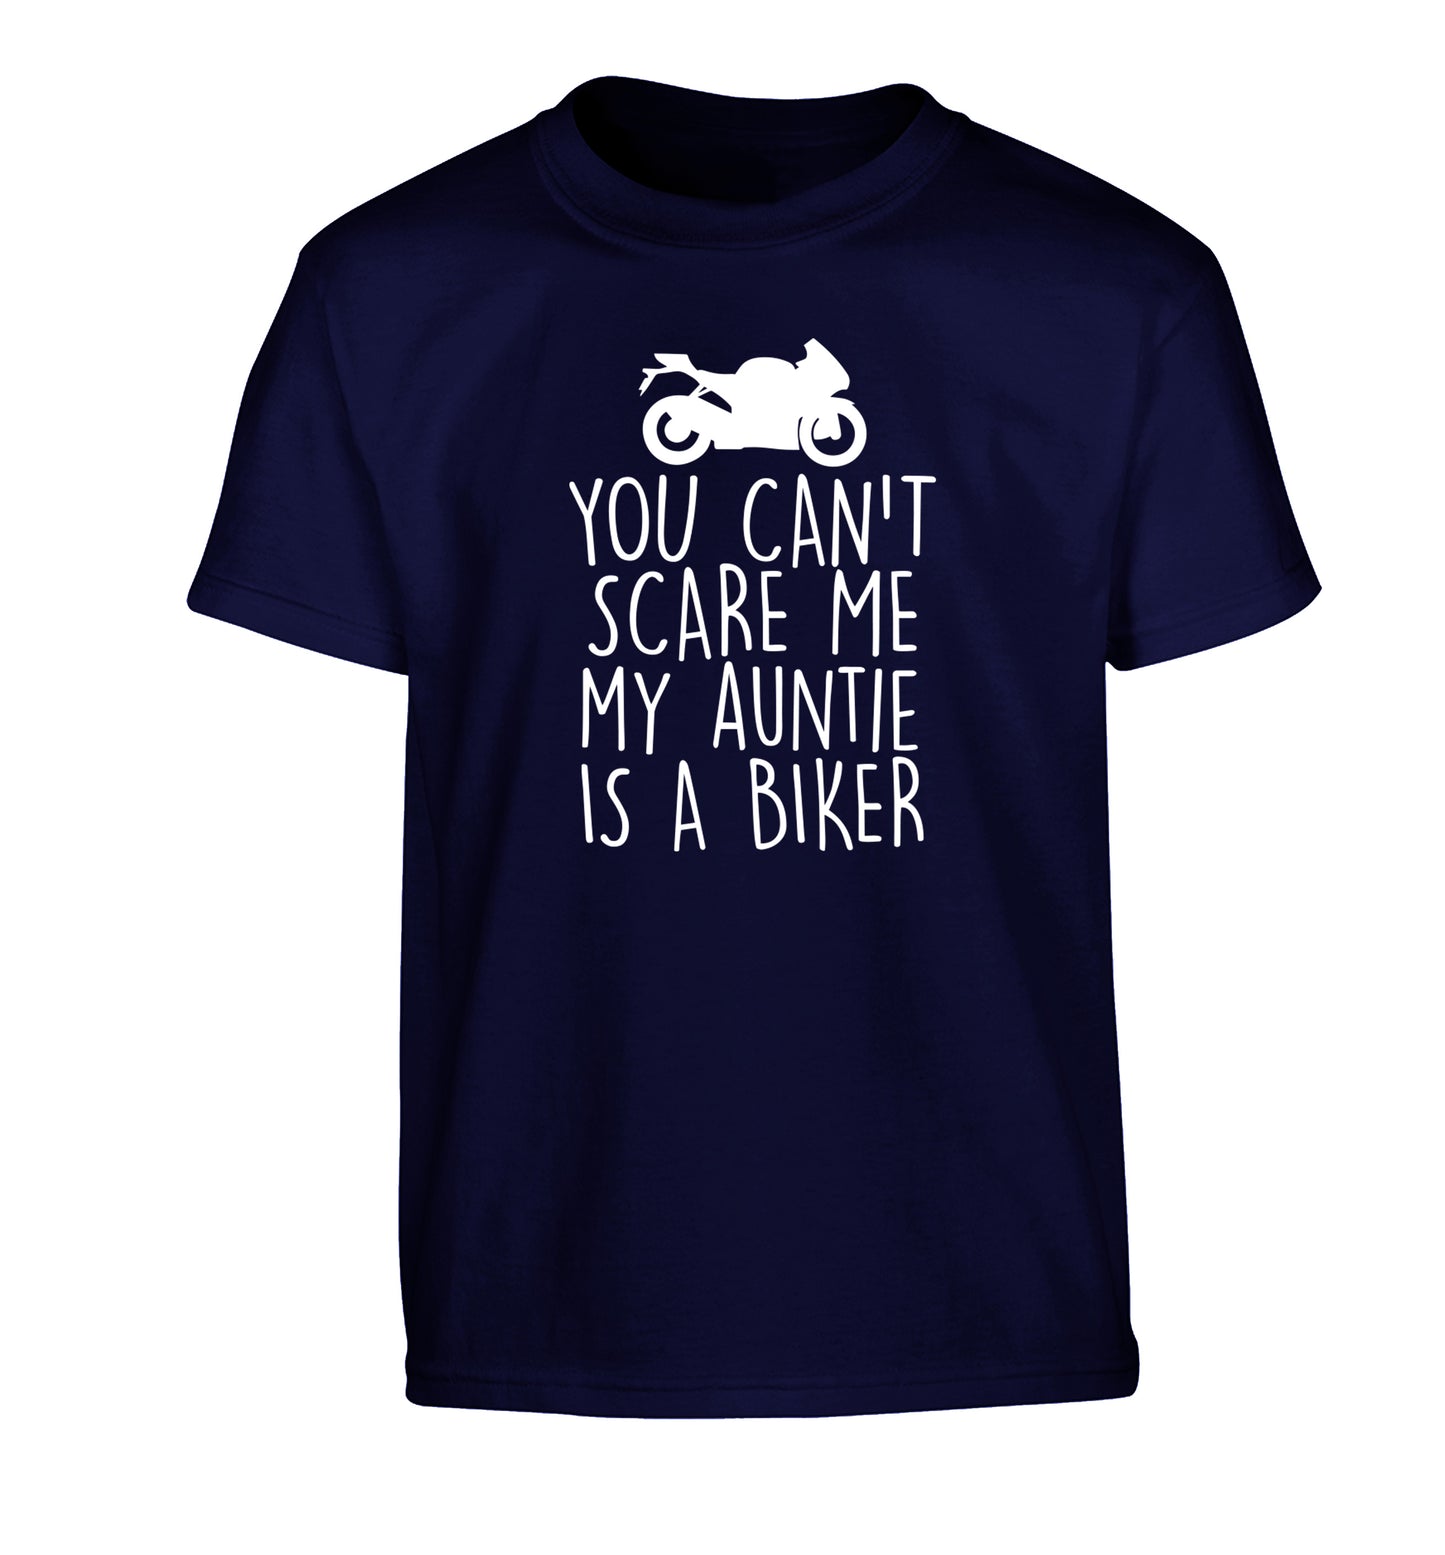 You can't scare me my auntie is a biker Children's navy Tshirt 12-13 Years